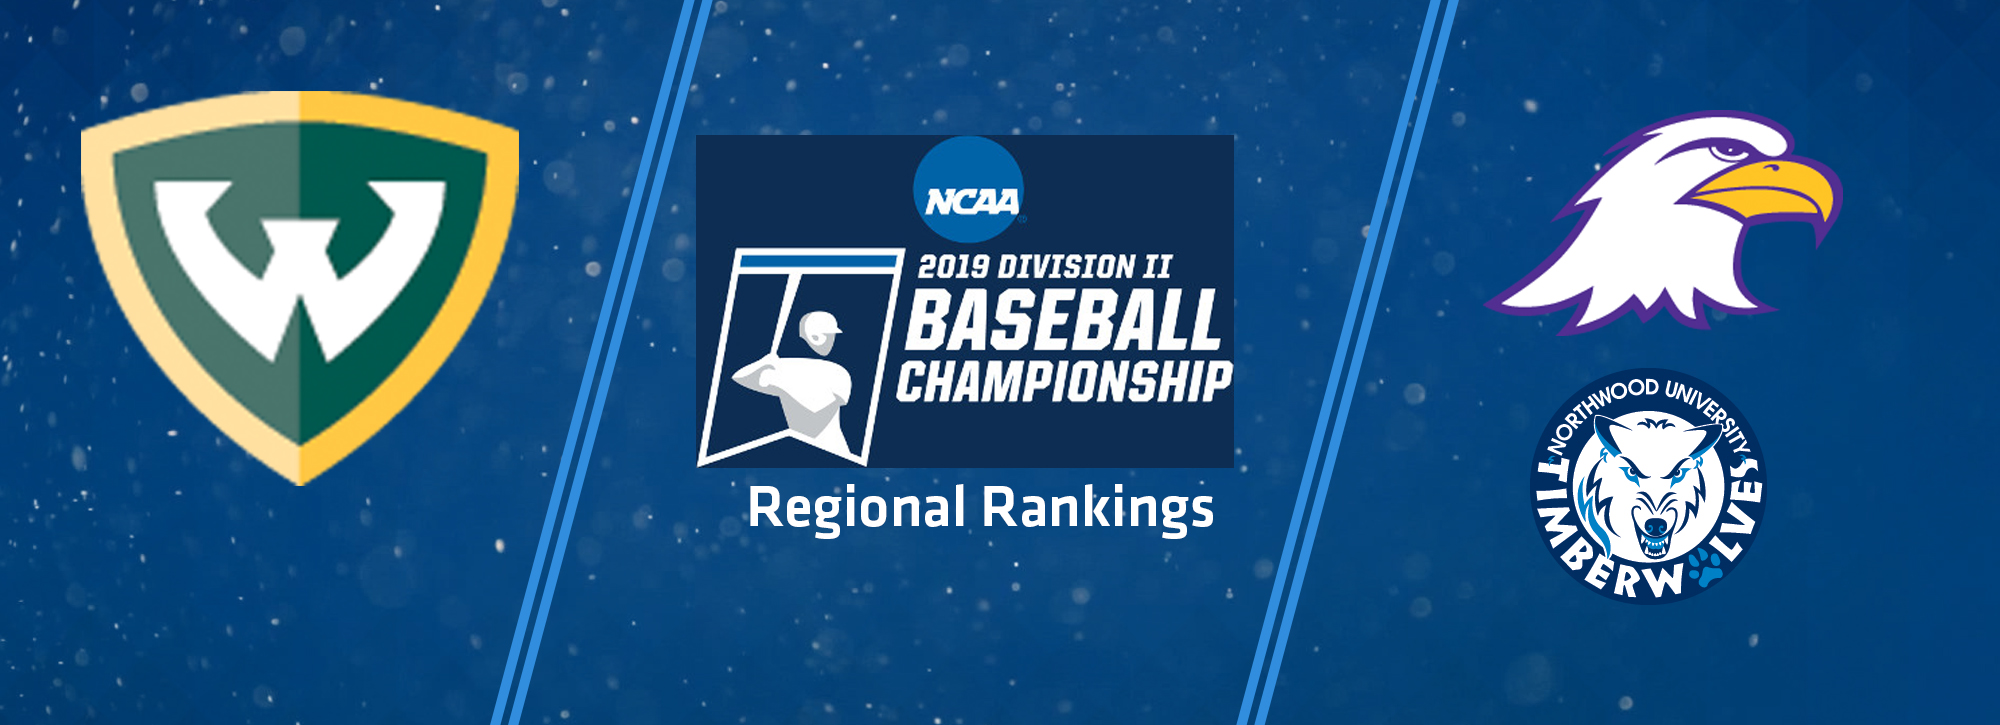 Warriors head Midwest Region baseball rankings; Eagles are second and T'Wolves fifth